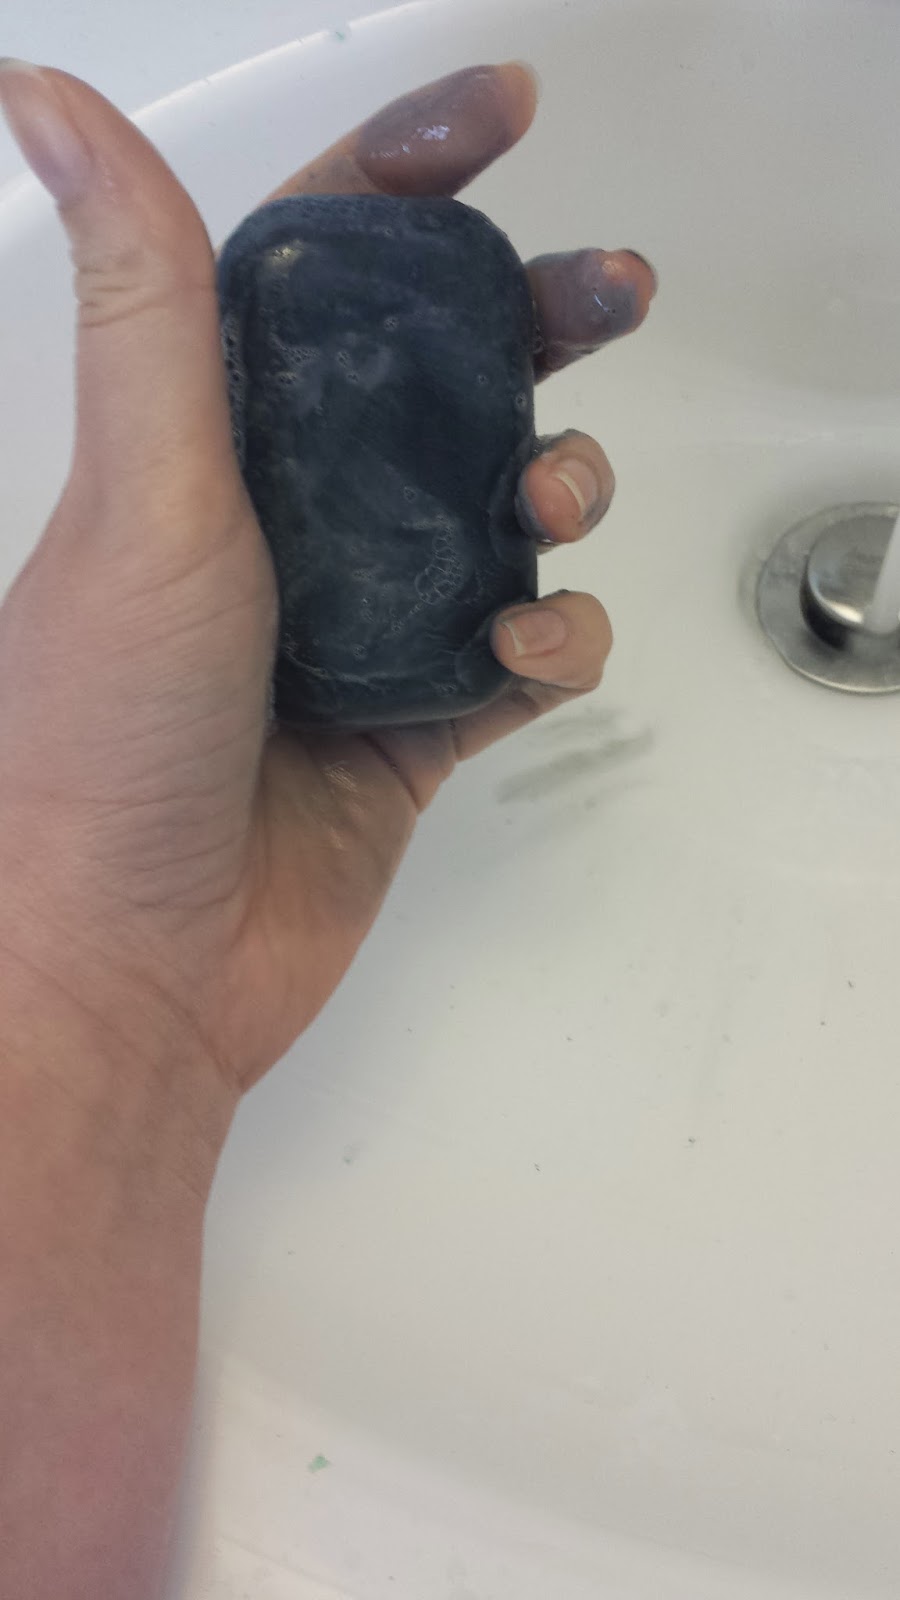 Guest Post: Healing Tree Bamboo Charcoal Soap Review & Giveaway - 5/29